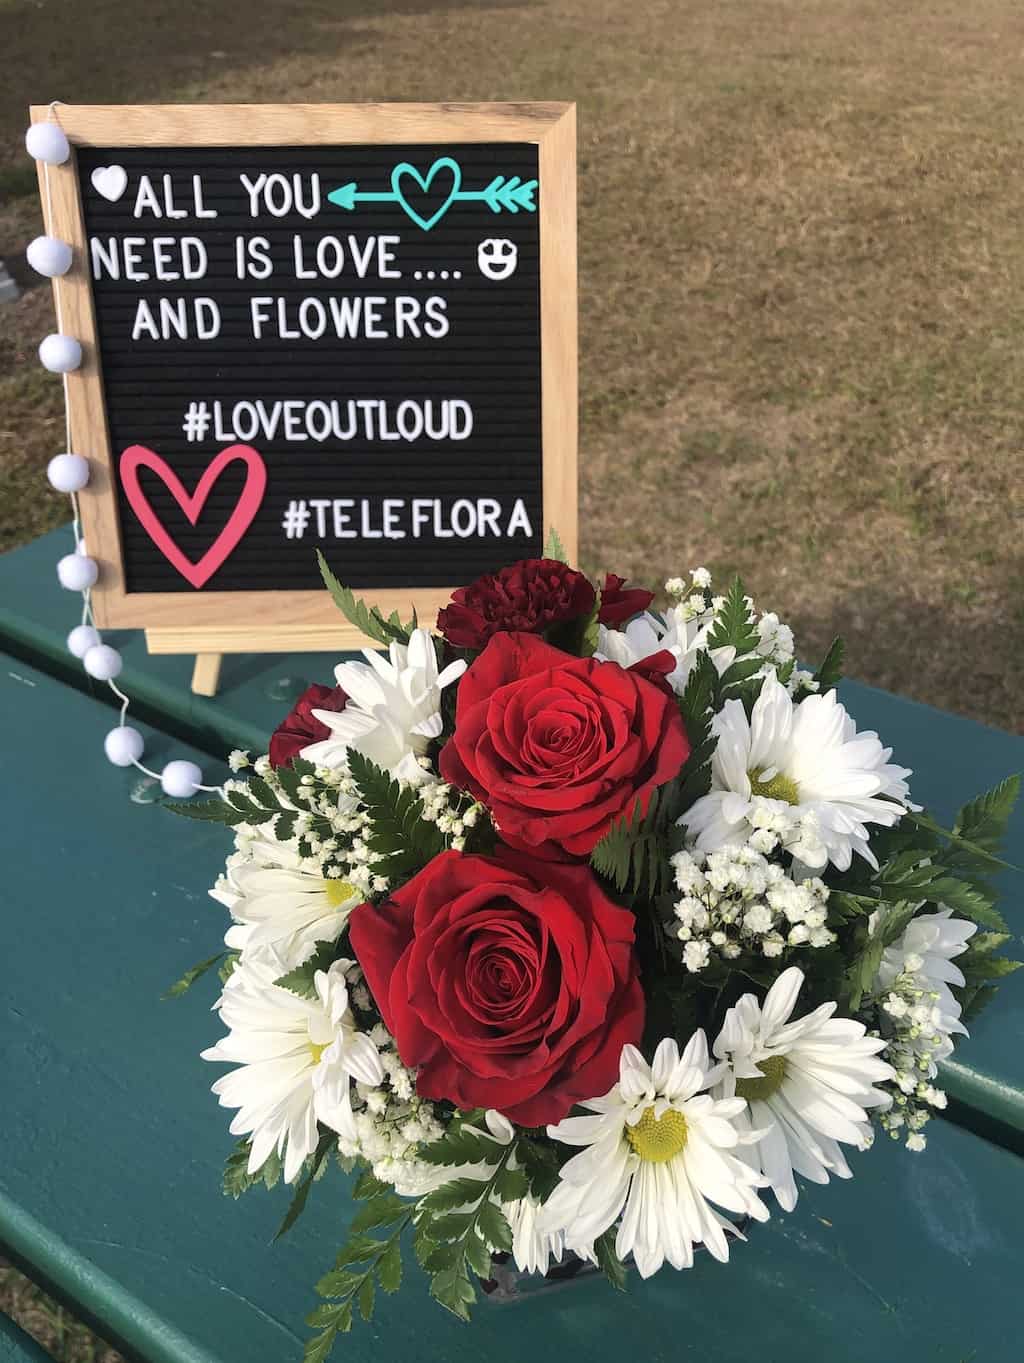 Teleflora has a wonderful selection of floral arrangements in beautiful containers. Bouquets filled with red roses, Asiatic lilies, chrysanthemums and more that your significant other will love.